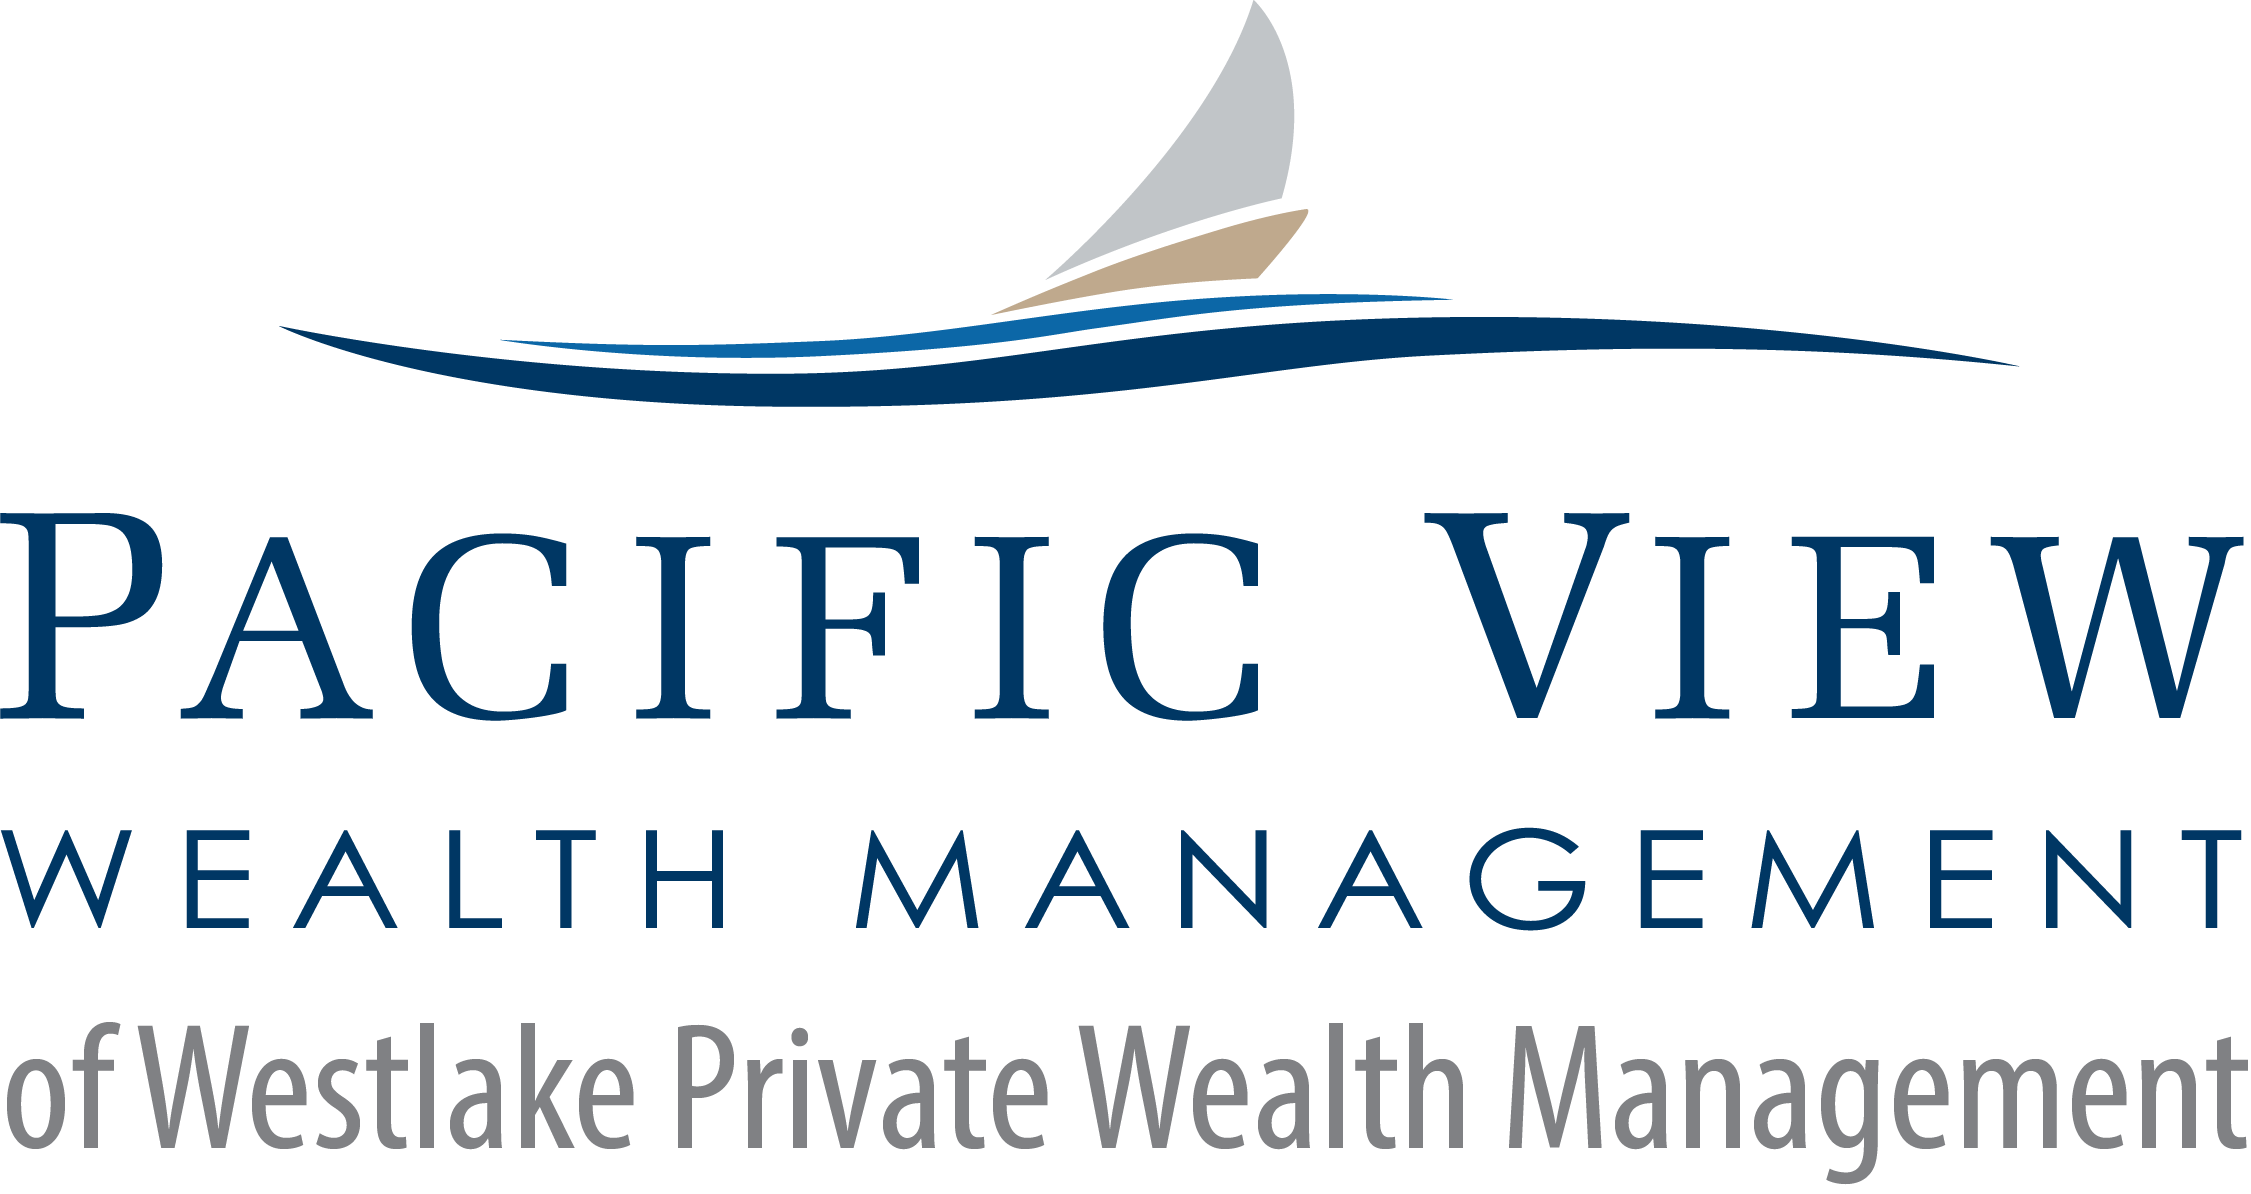 Pacific View Wealth Management of Westlake Private Wealth Management